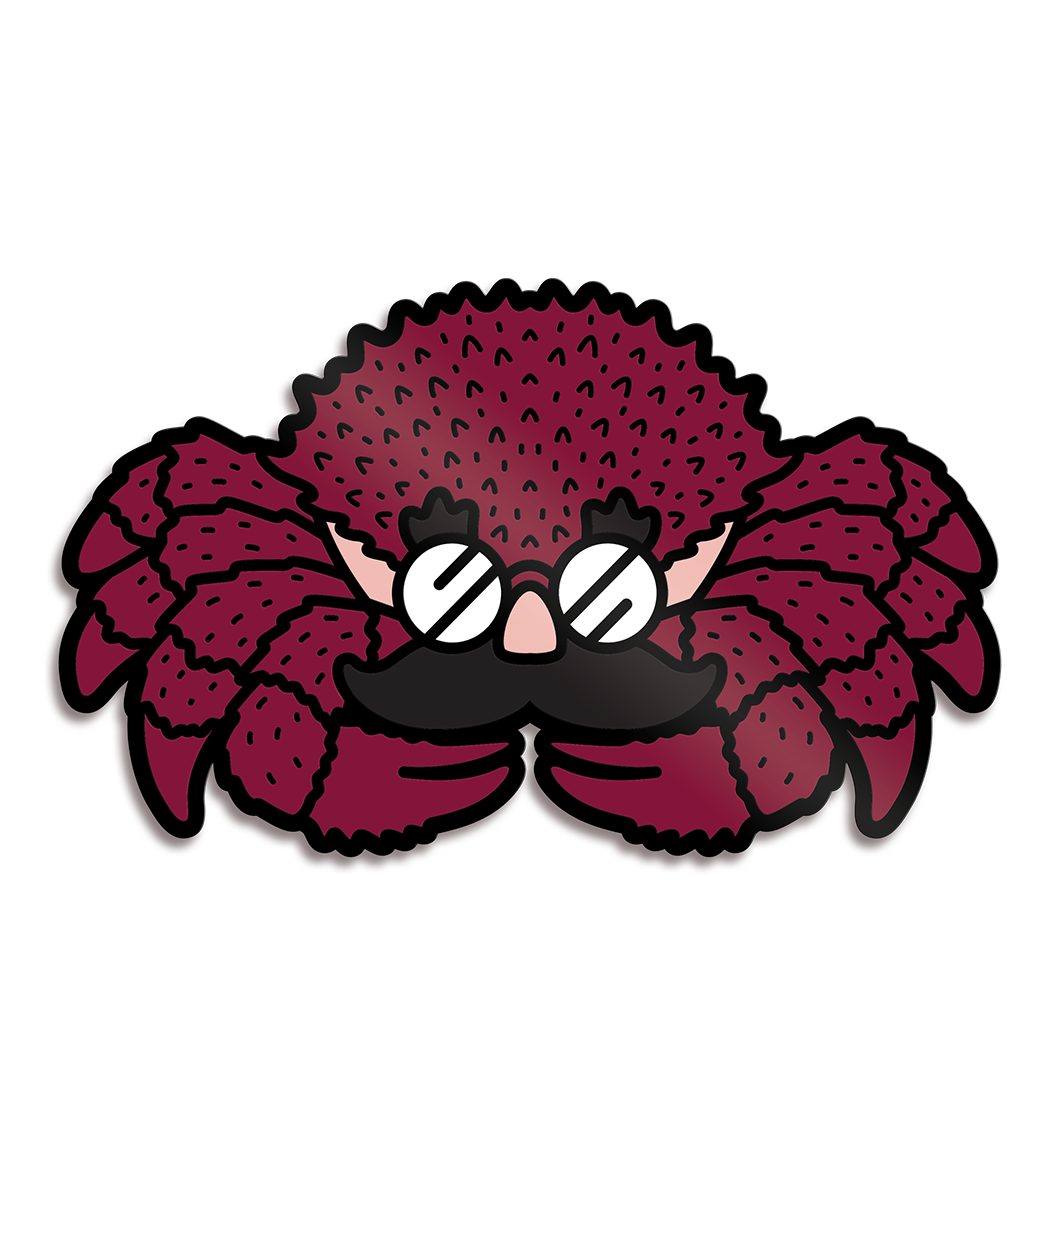 Cartoon representation of red crab with black outline and small black texture lines with a fake mustache, nose, and glasses on its face - from Eons